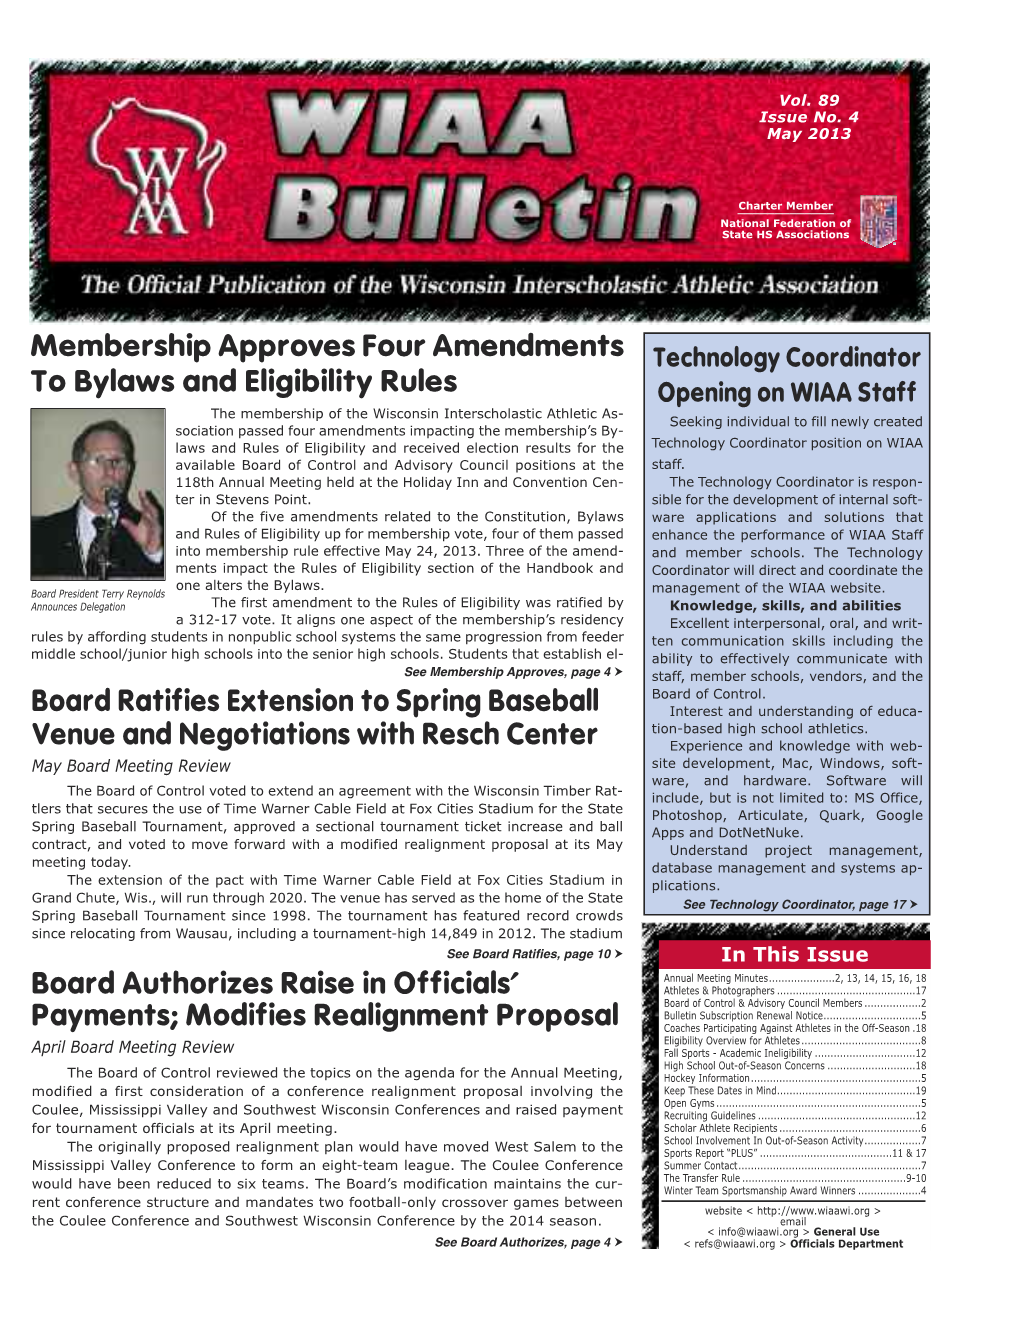 Membership Approves Four Amendments to Bylaws And